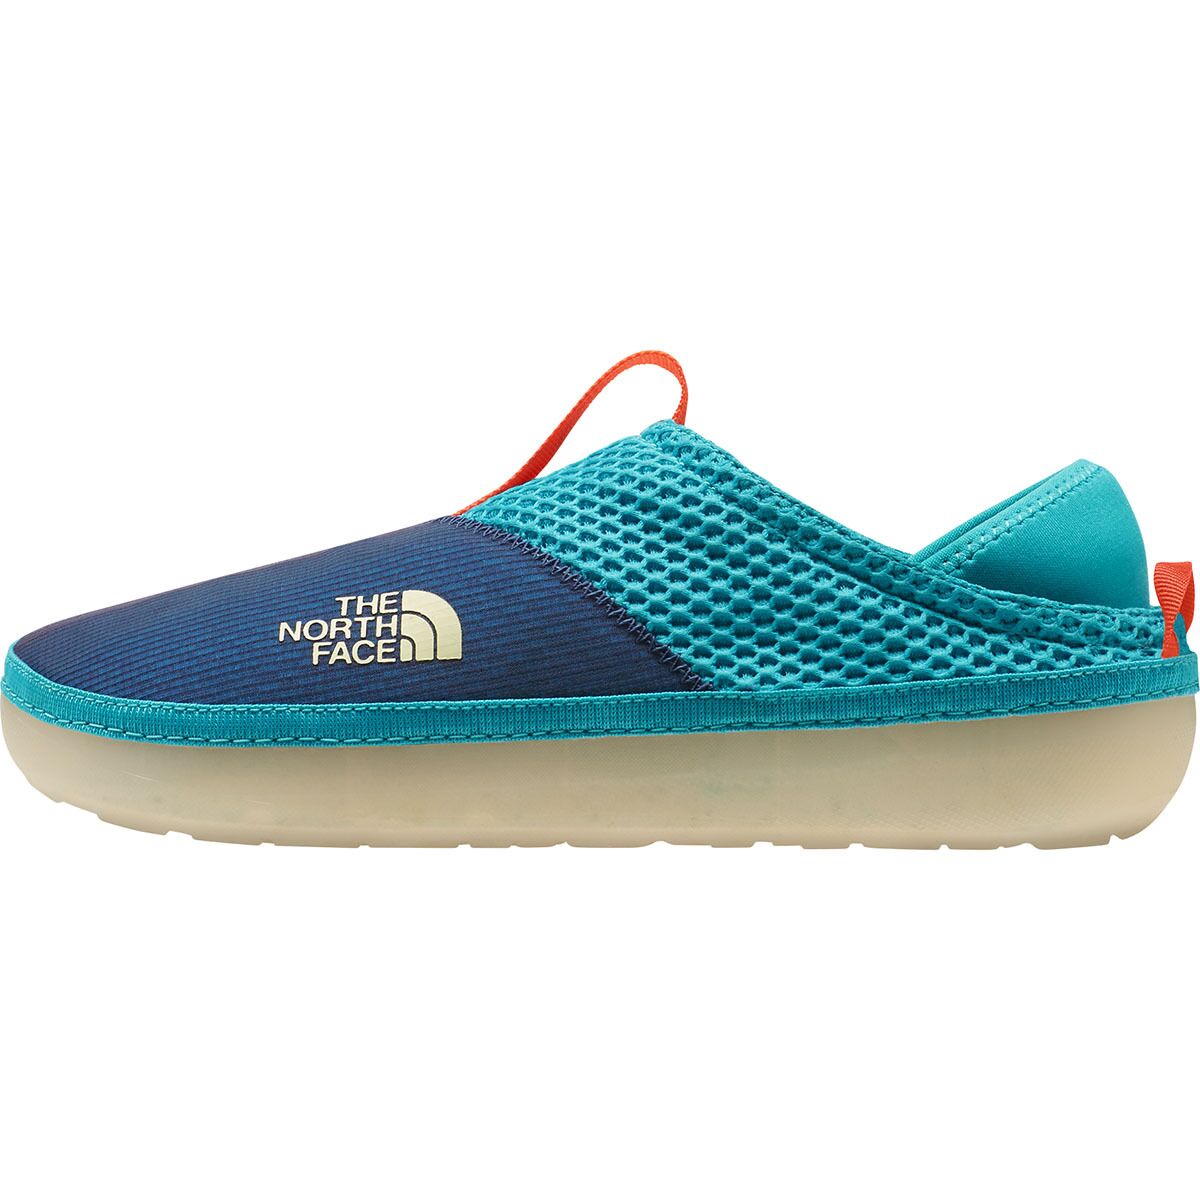 The North Face Base Camp Mule Shoe